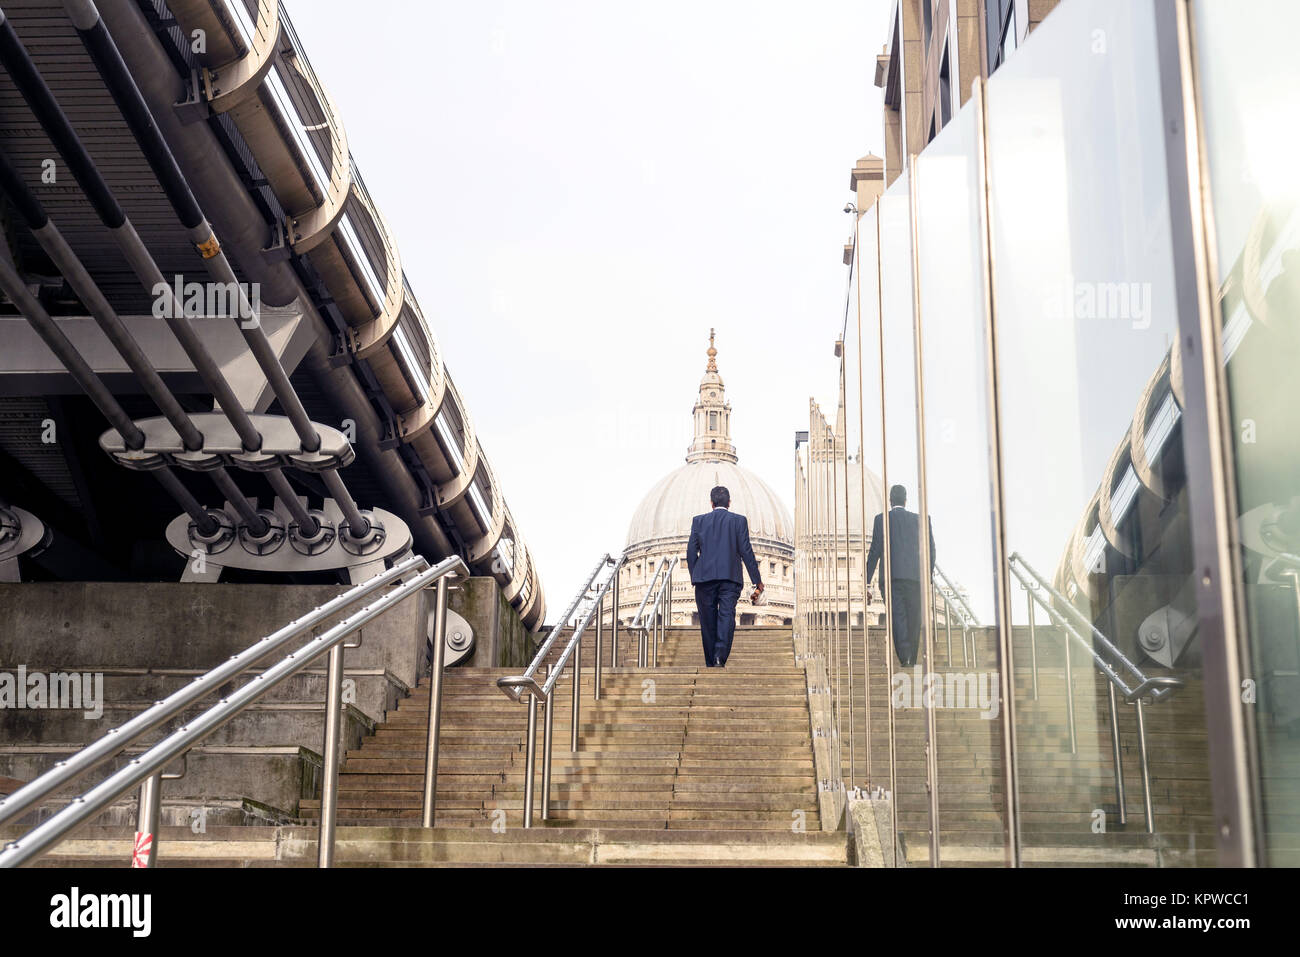 Man in business suit walking up steps towards St Paul’s Cathedral in London England Stock Photo